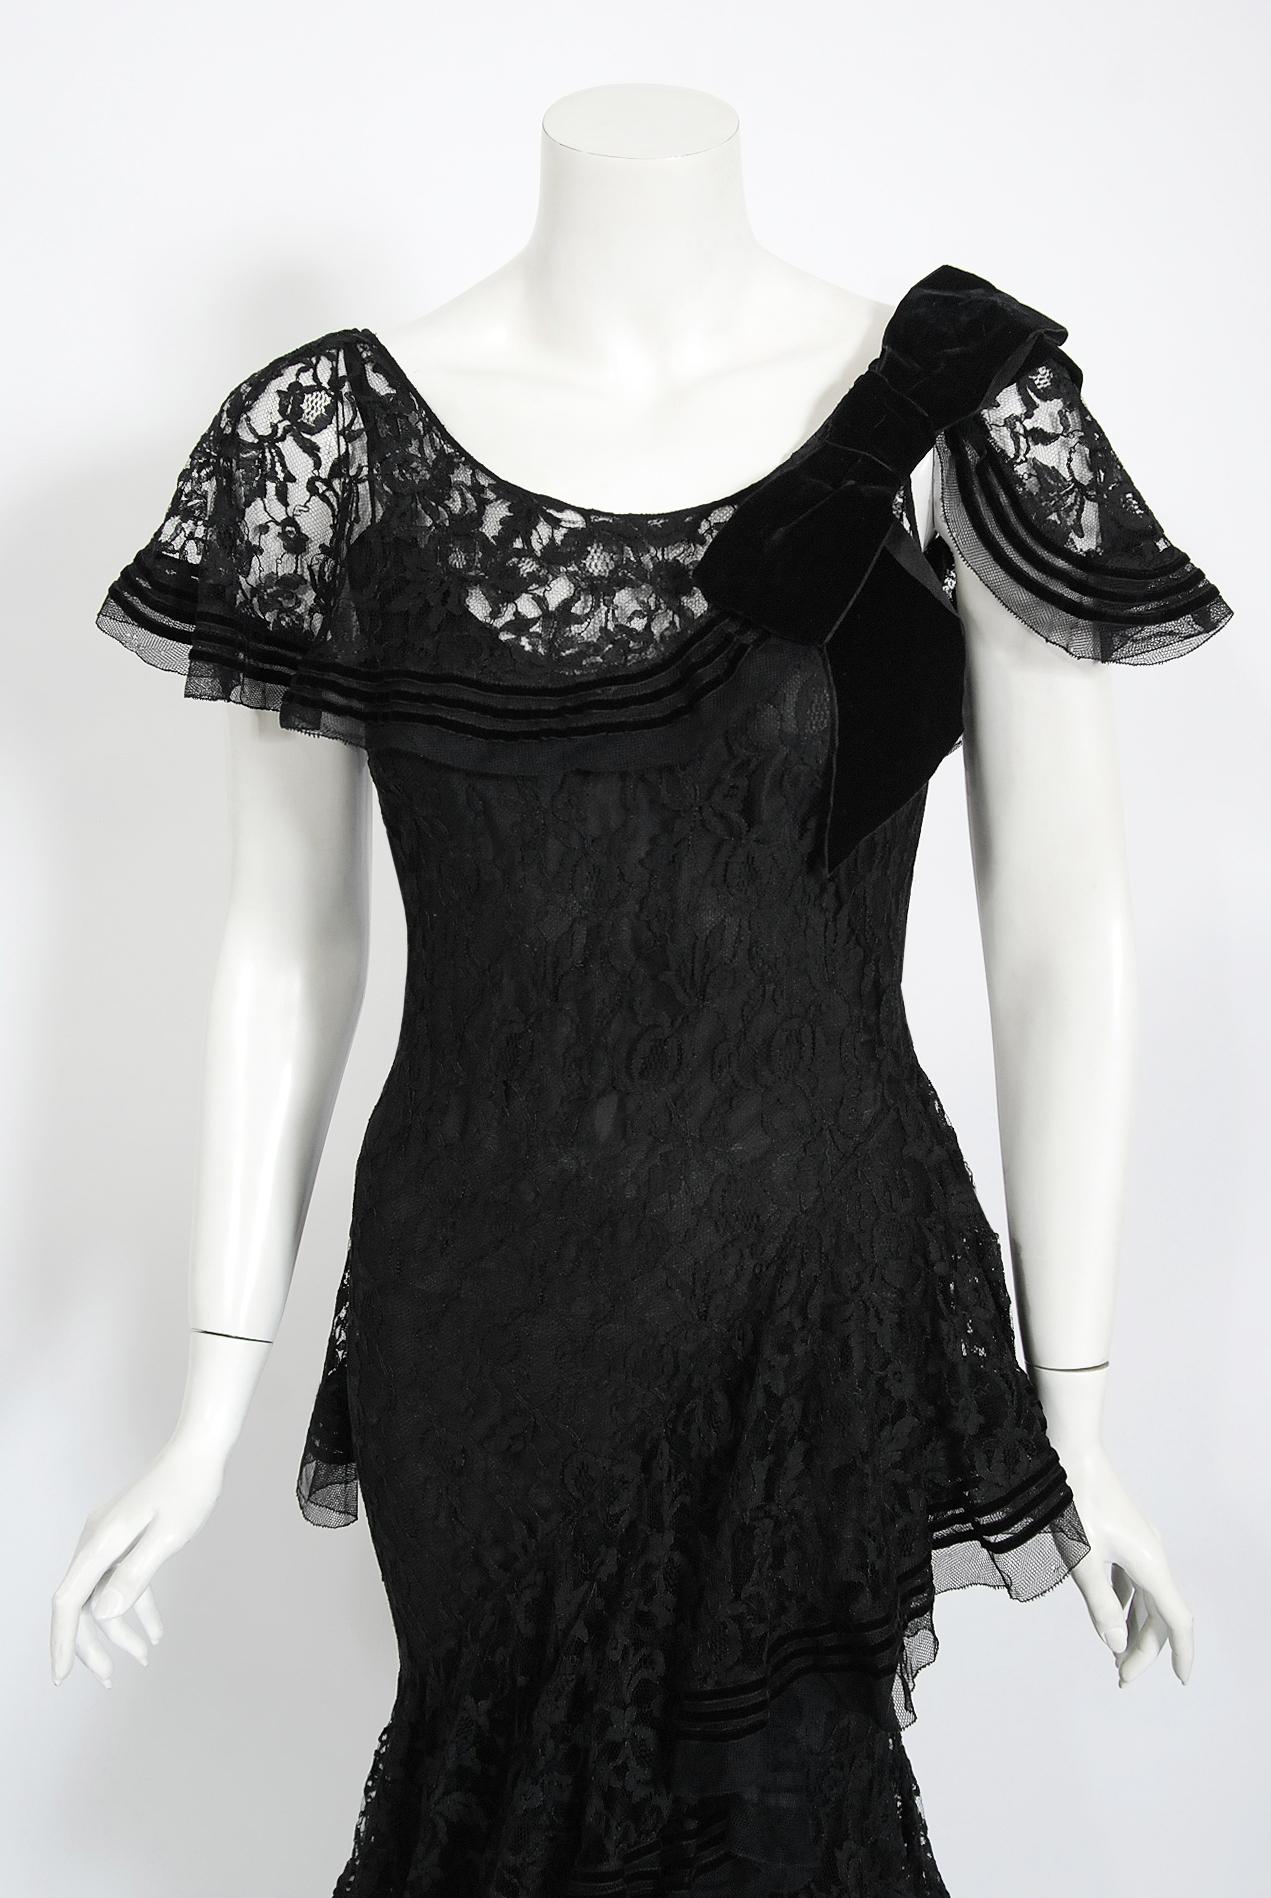 Undiminished by time, this mid 1930's black lace couture gown still casts its magical spell. This exceptional French beauty is fashioned in the highest quality black floral patterned lace that has been carefully embellished with velvet striped